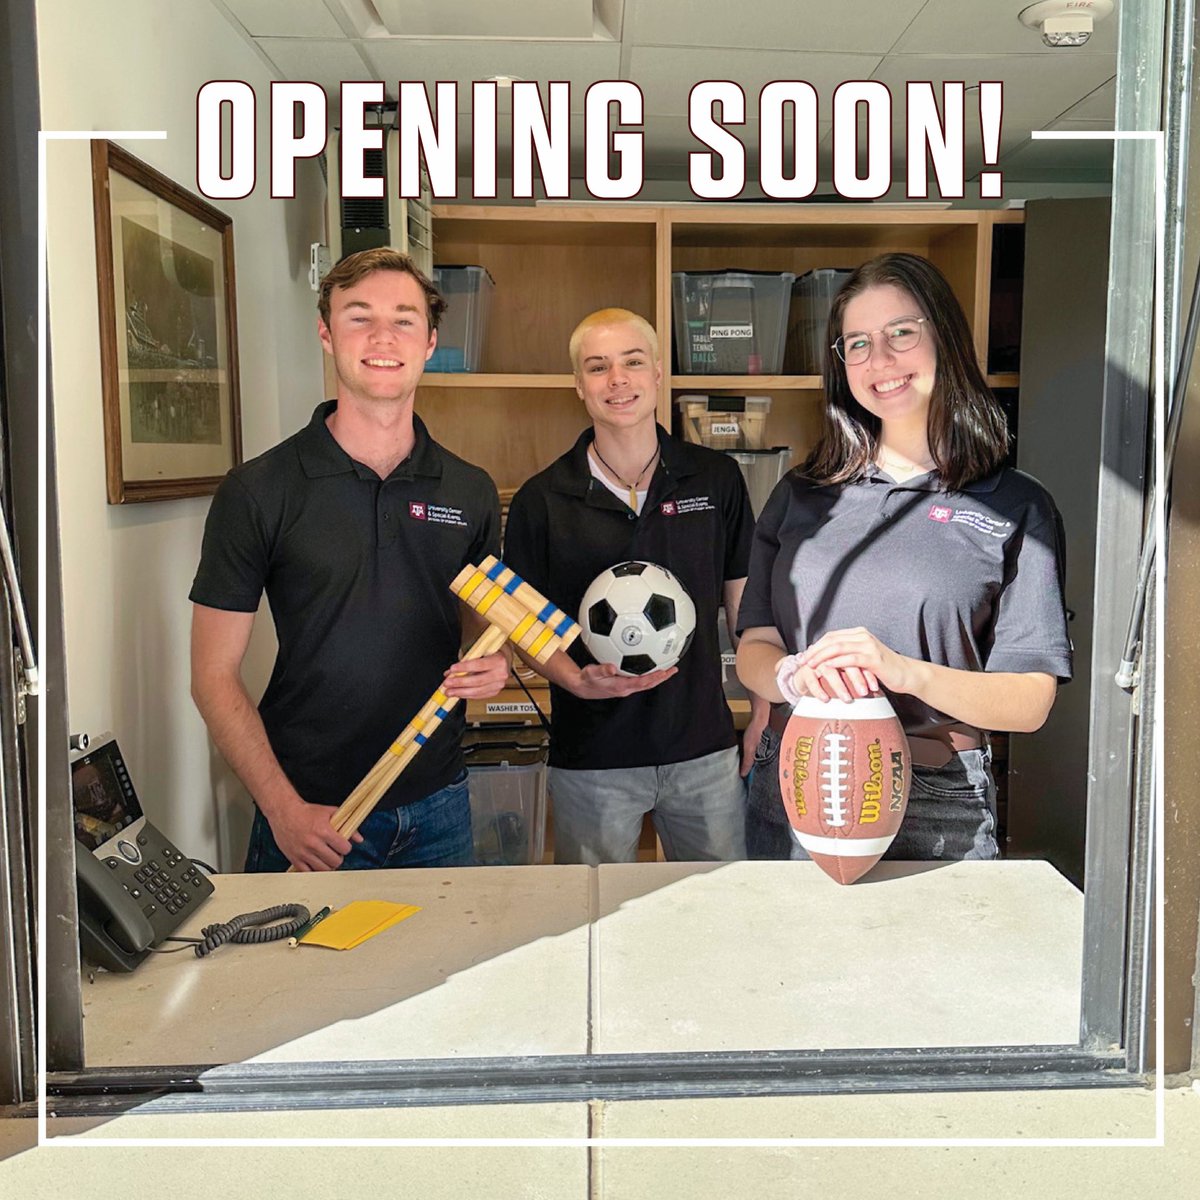 The Aggie Park Activities office opens Monday Jan 23 at the Anteater Field House! Leave your student ID or drivers license to check out any of the available games and activities! 🌳⚽️🏈🥏🥍⛳️ @TAMU